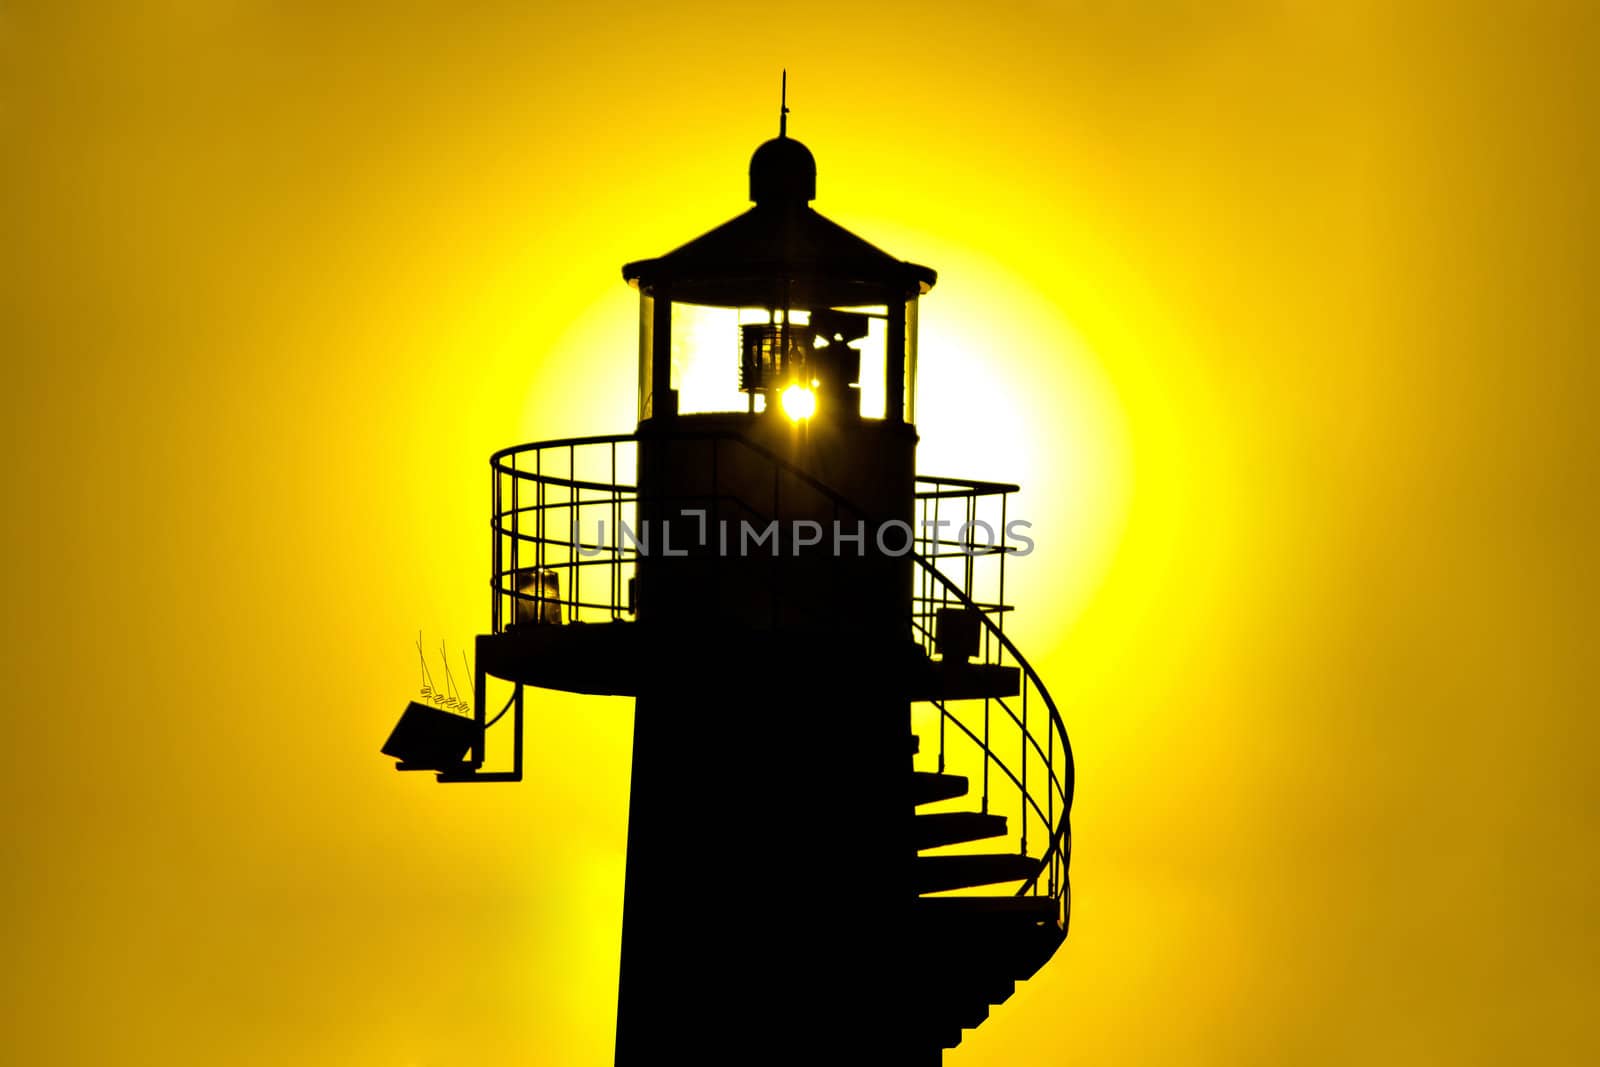 Lighthouse silhouetteat yellow sunset by xbrchx